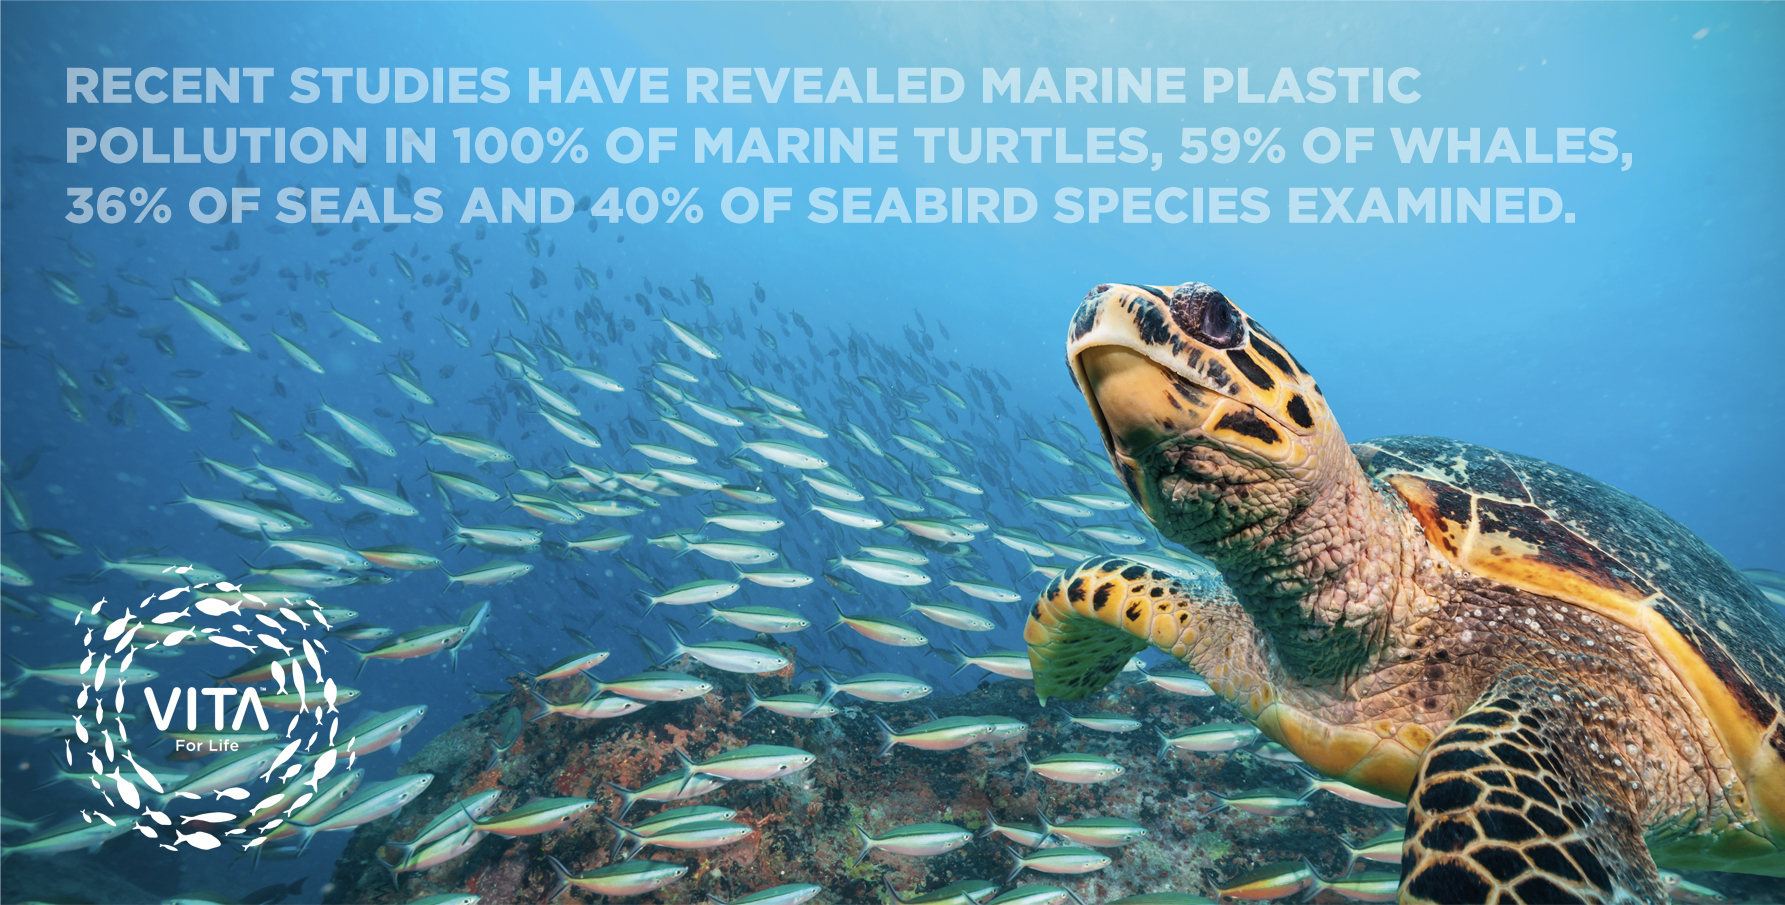 RECENT STUDIES HAVE REVEALED MARINE PLASTIC POLLUTION IN 100% OF MARINE TURTLES, 59% OF WHALES, 36% OF SEALS AND 40% OF SEABIRD SPECIES EXAMINED.